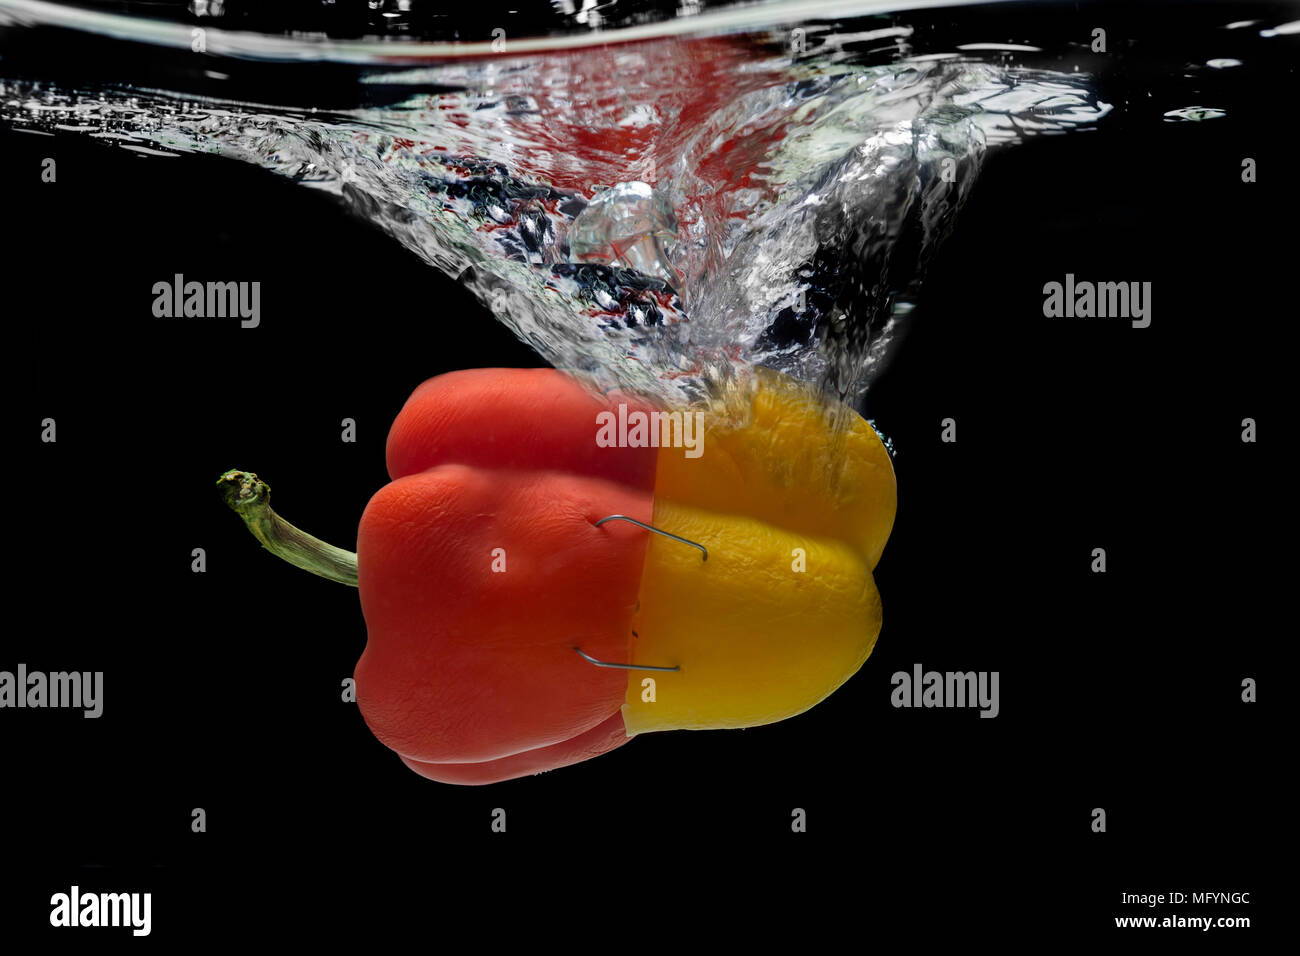 Abstract yellow-red pepper, splash of water. Stock Photo